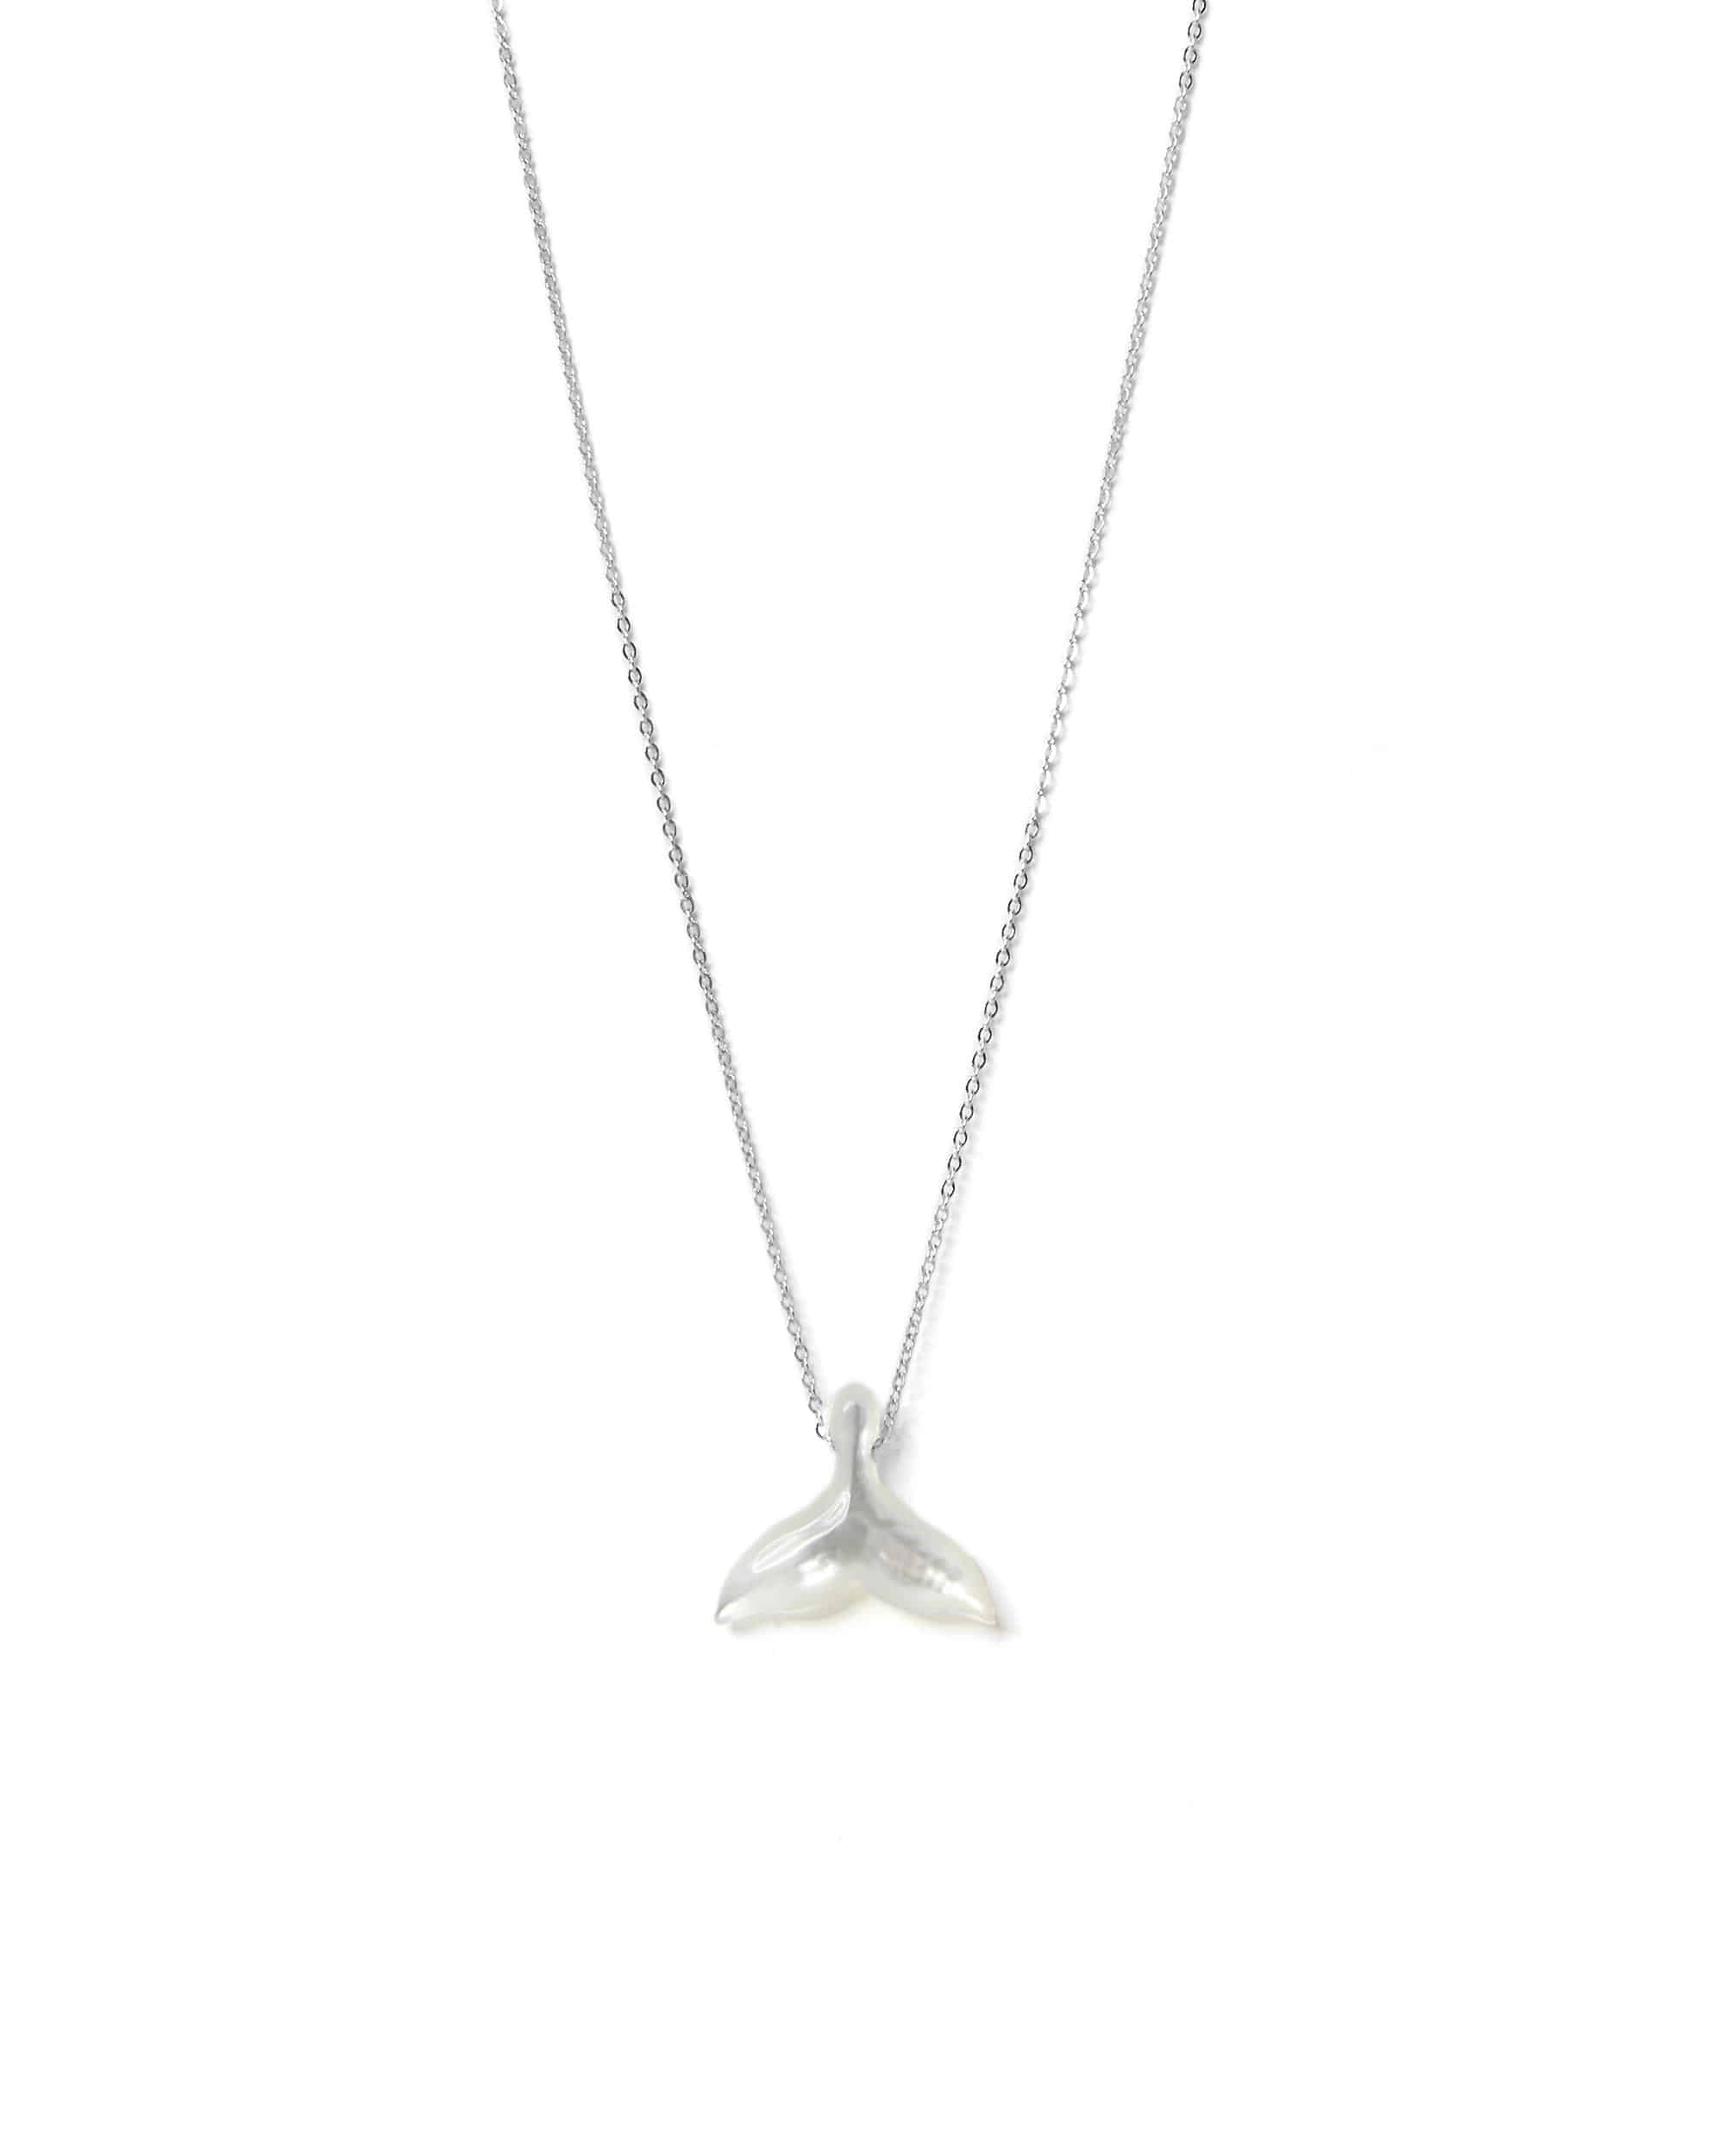 Dolphin Tail White mother-of-pearl Silver Necklace